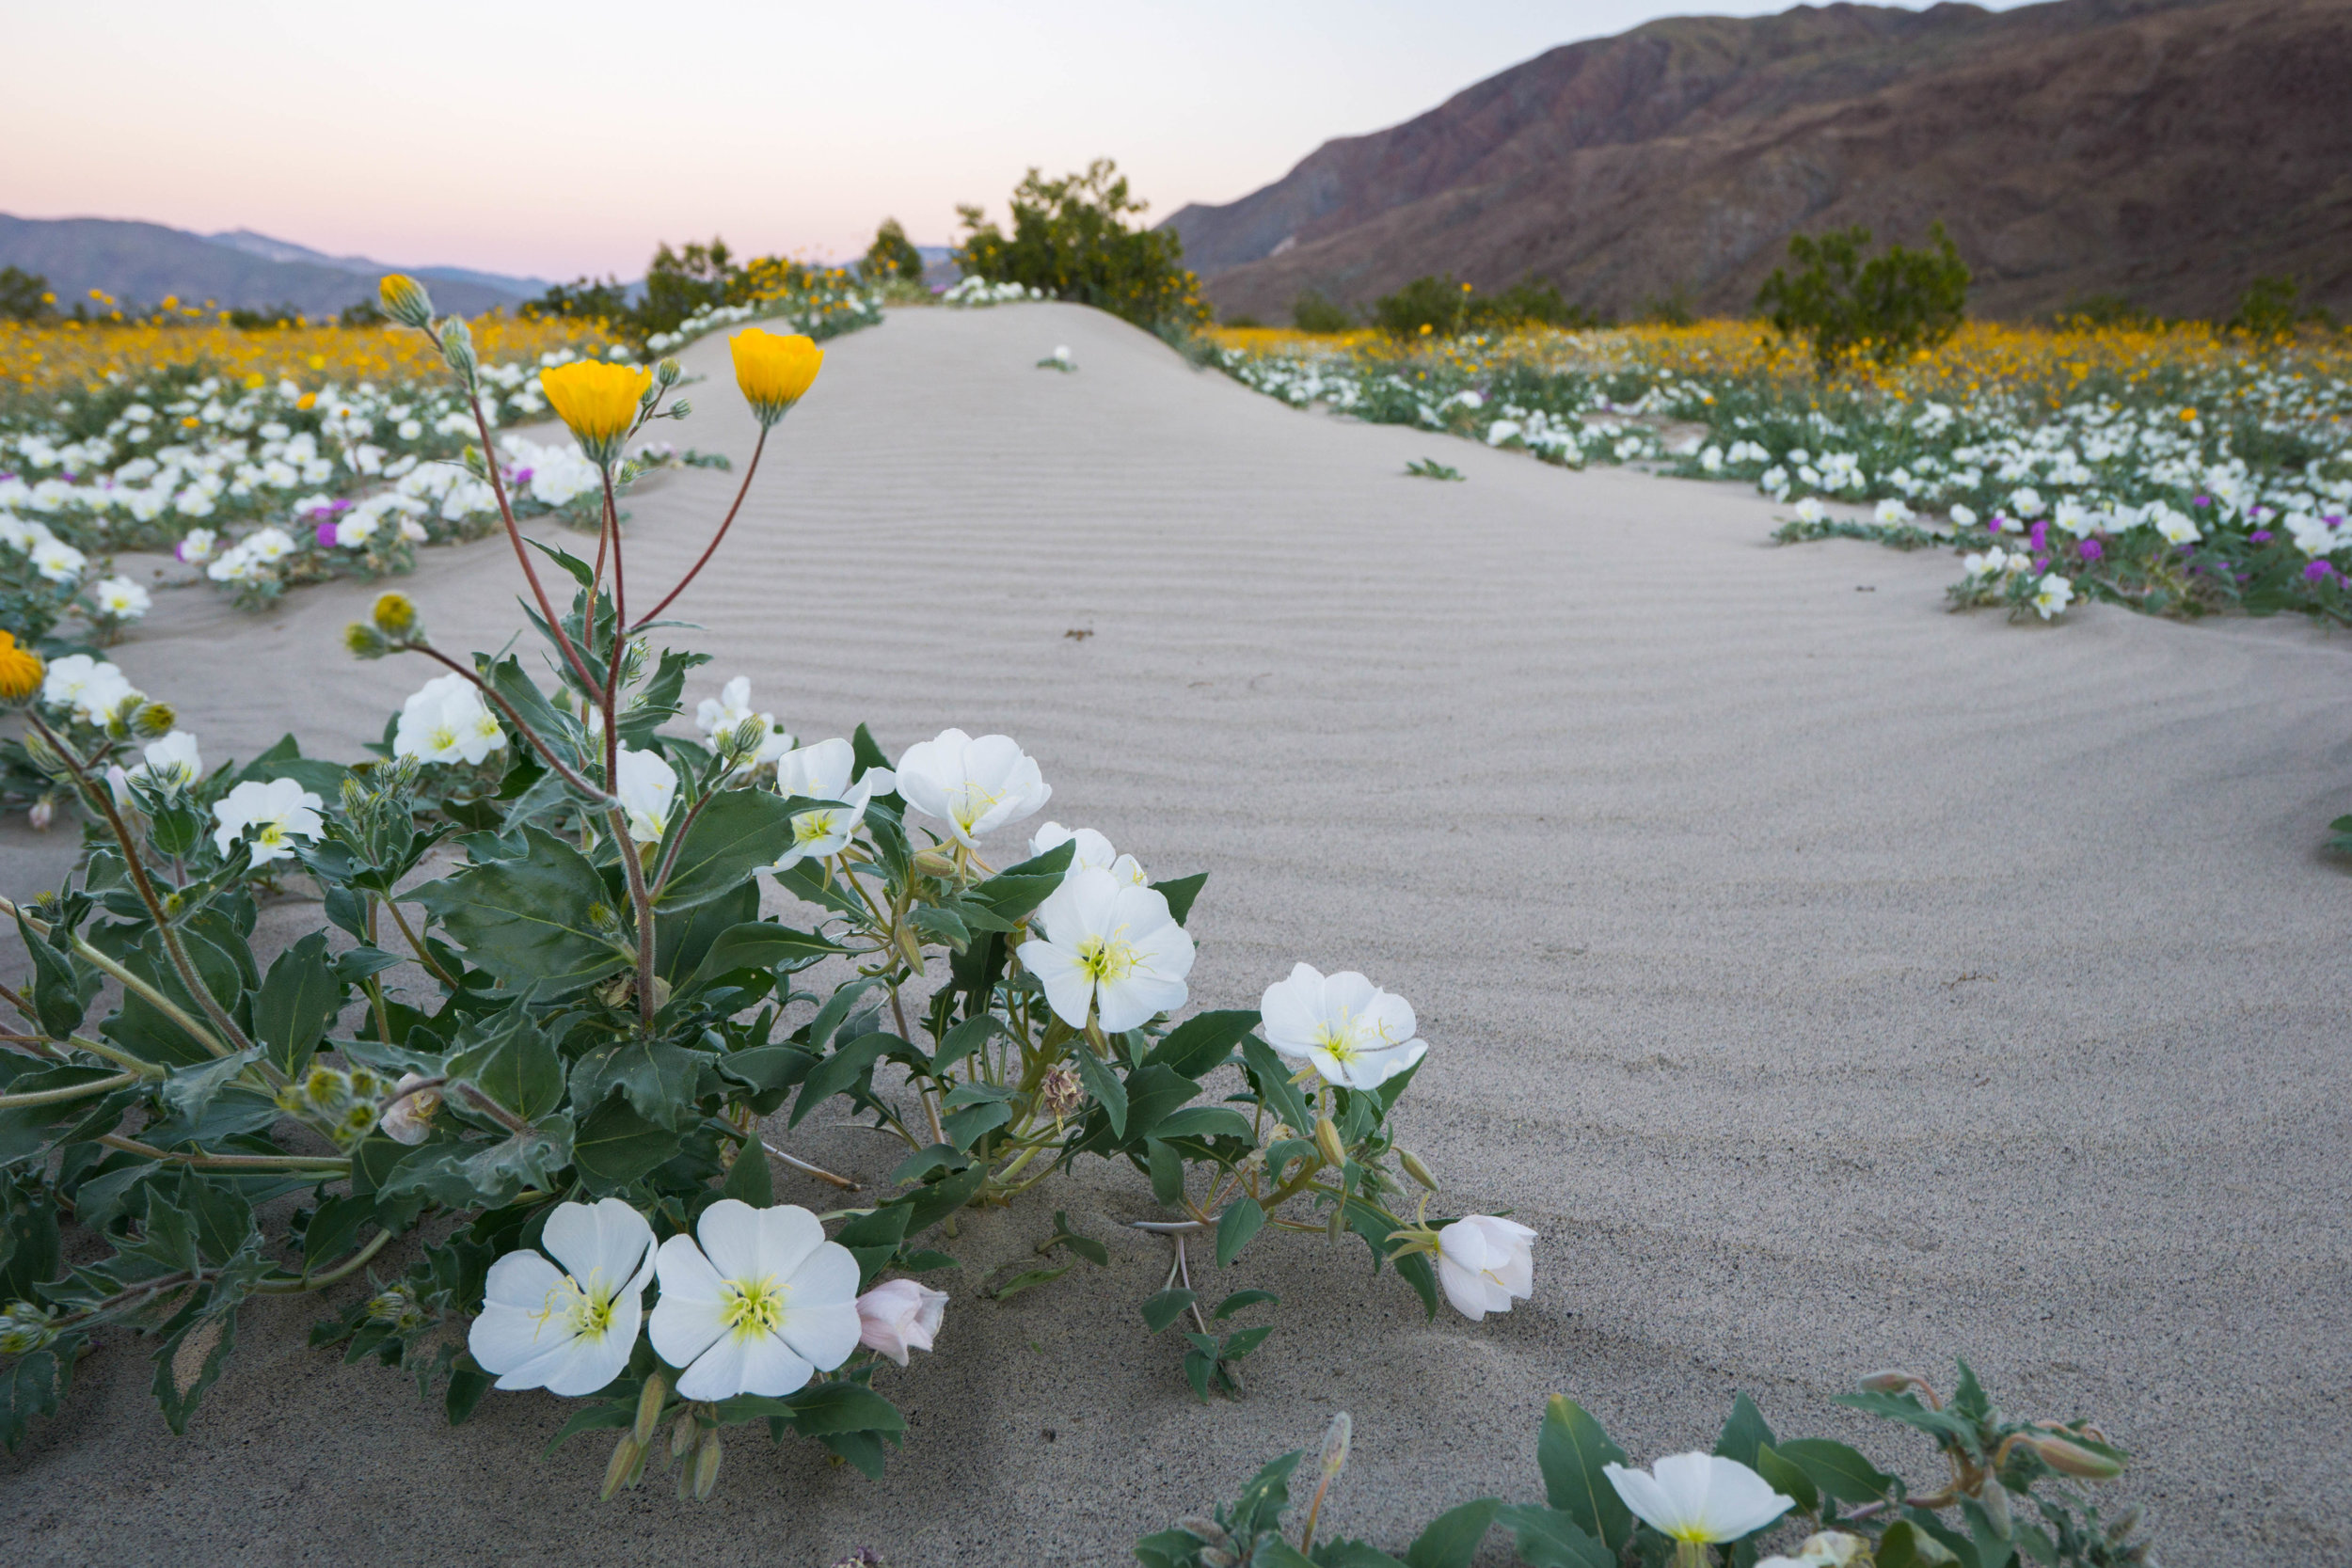 5 years of drought & heavy winter rains transformed the seas of sand into waves of wildflowers